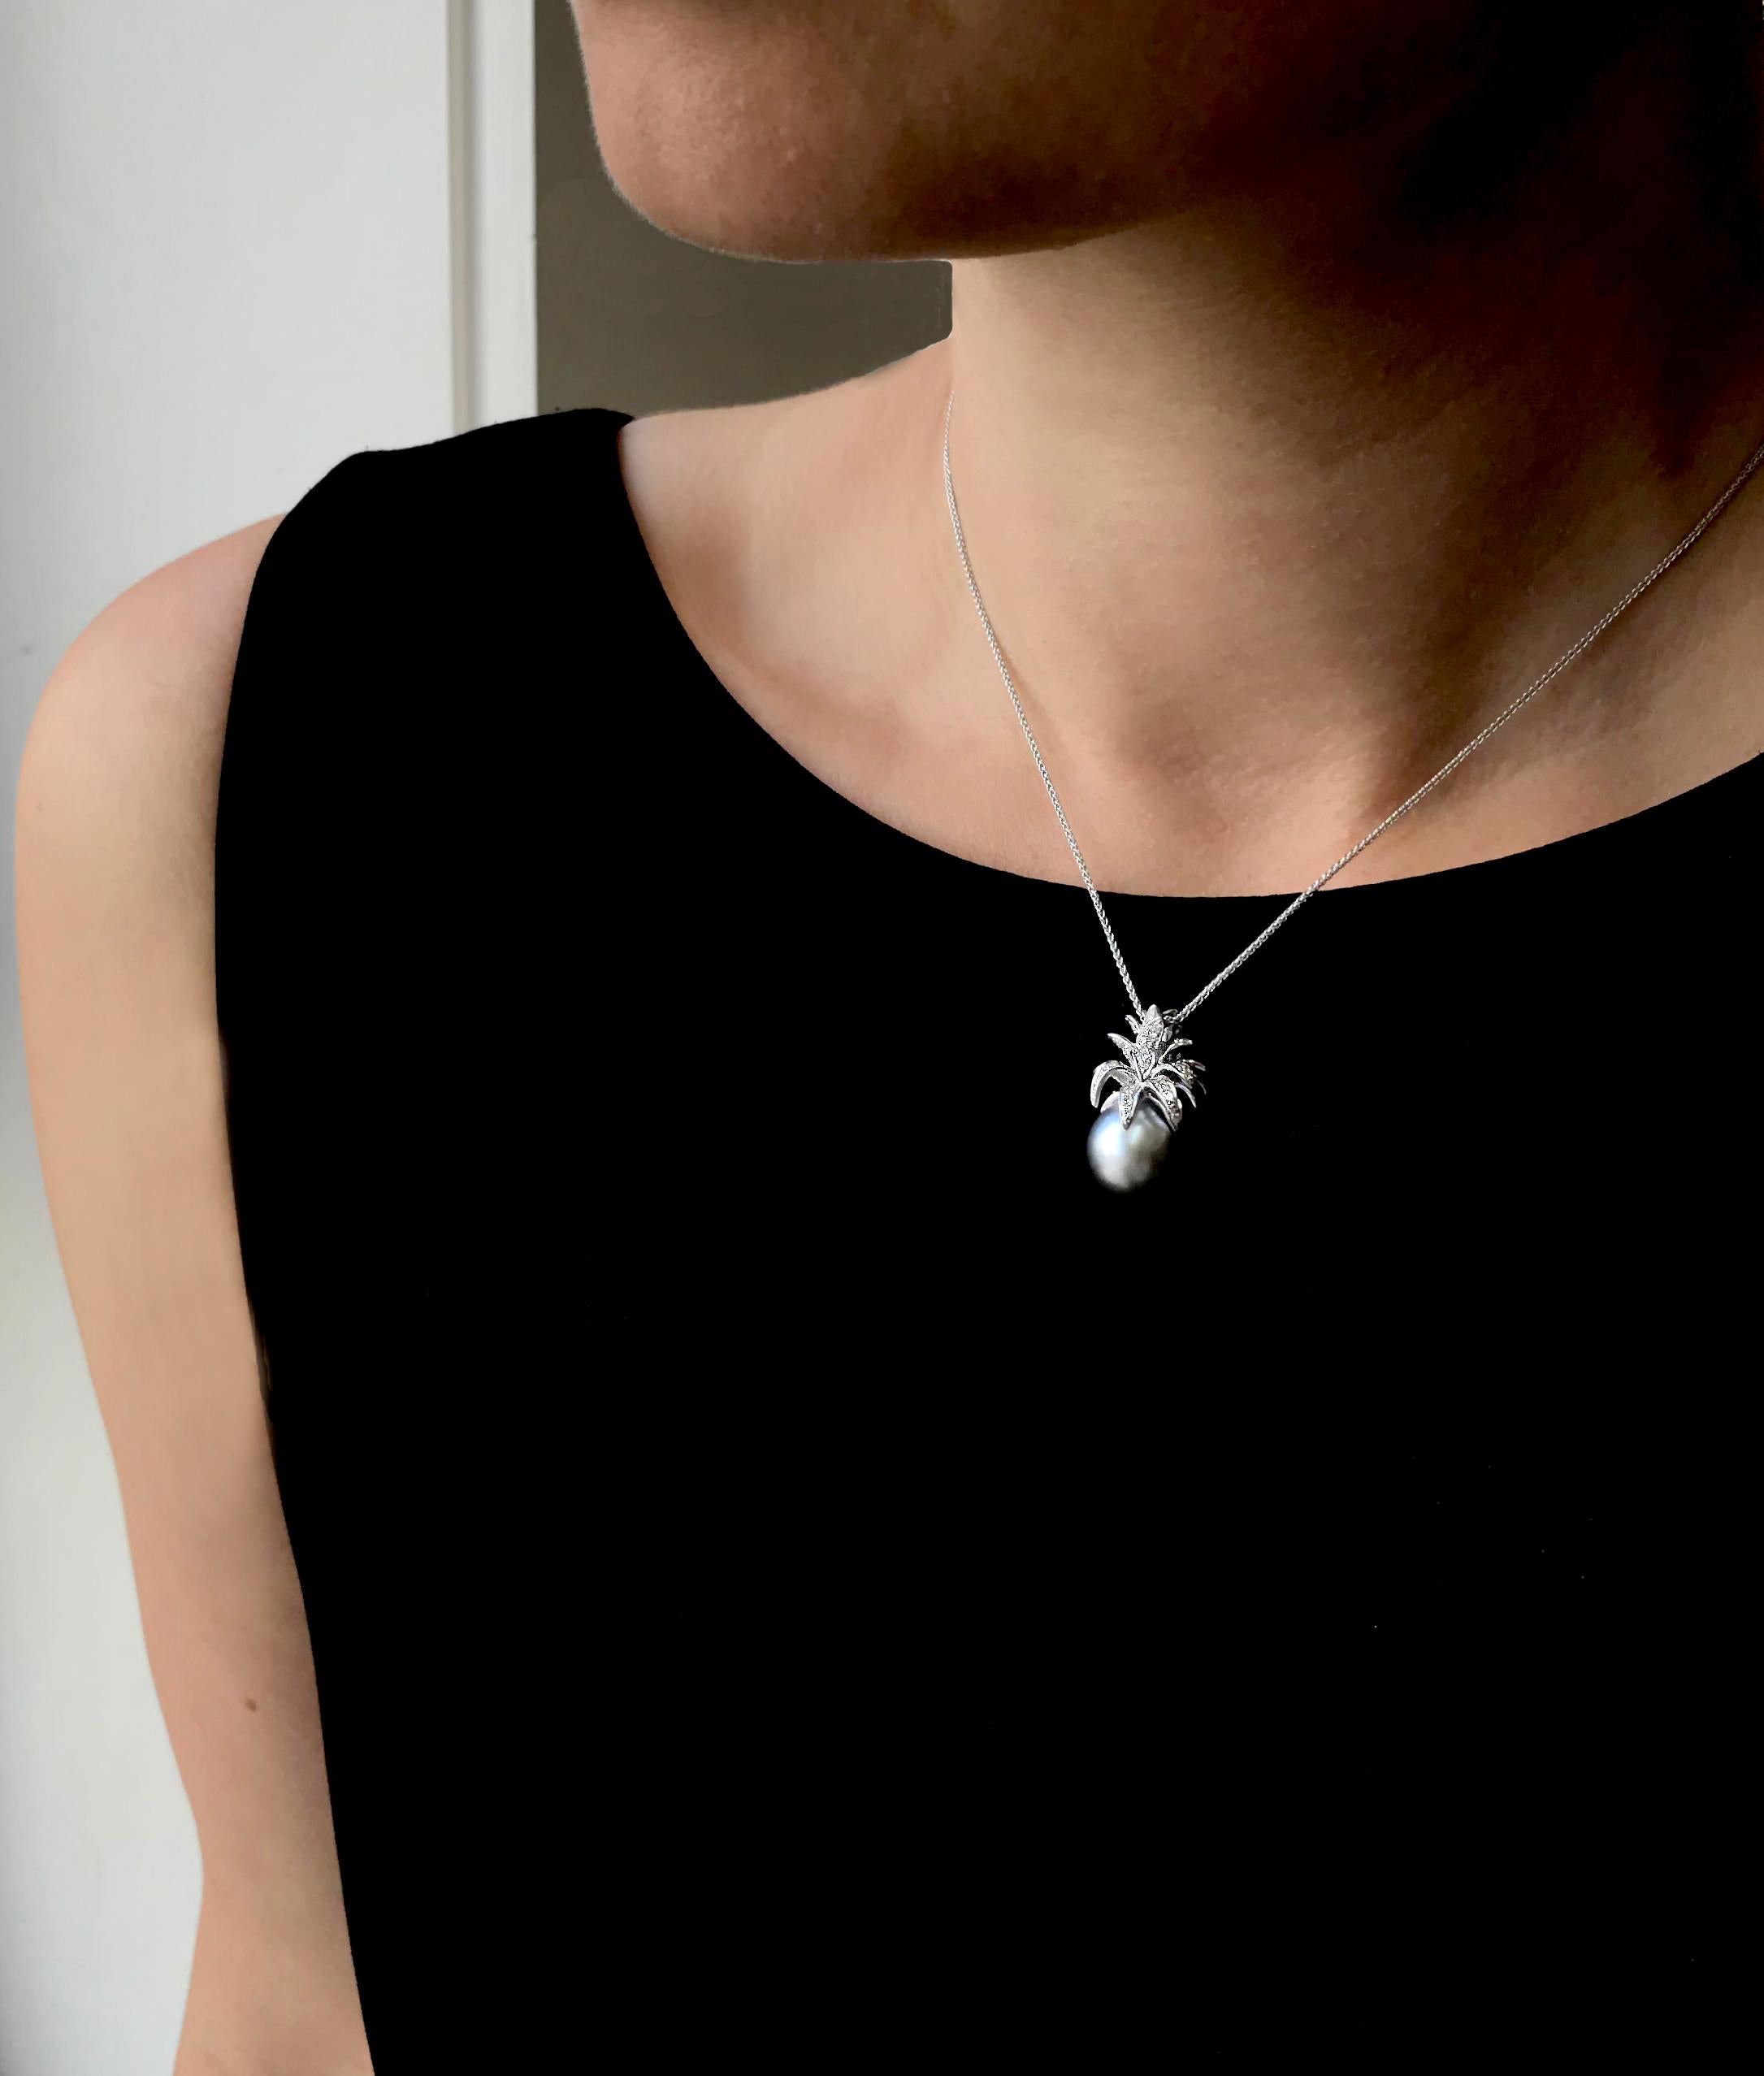 This fun pendant by Yoko London, features a Cool Grey Tahitian Pearl at its base which functions in the design as the Pineapple 